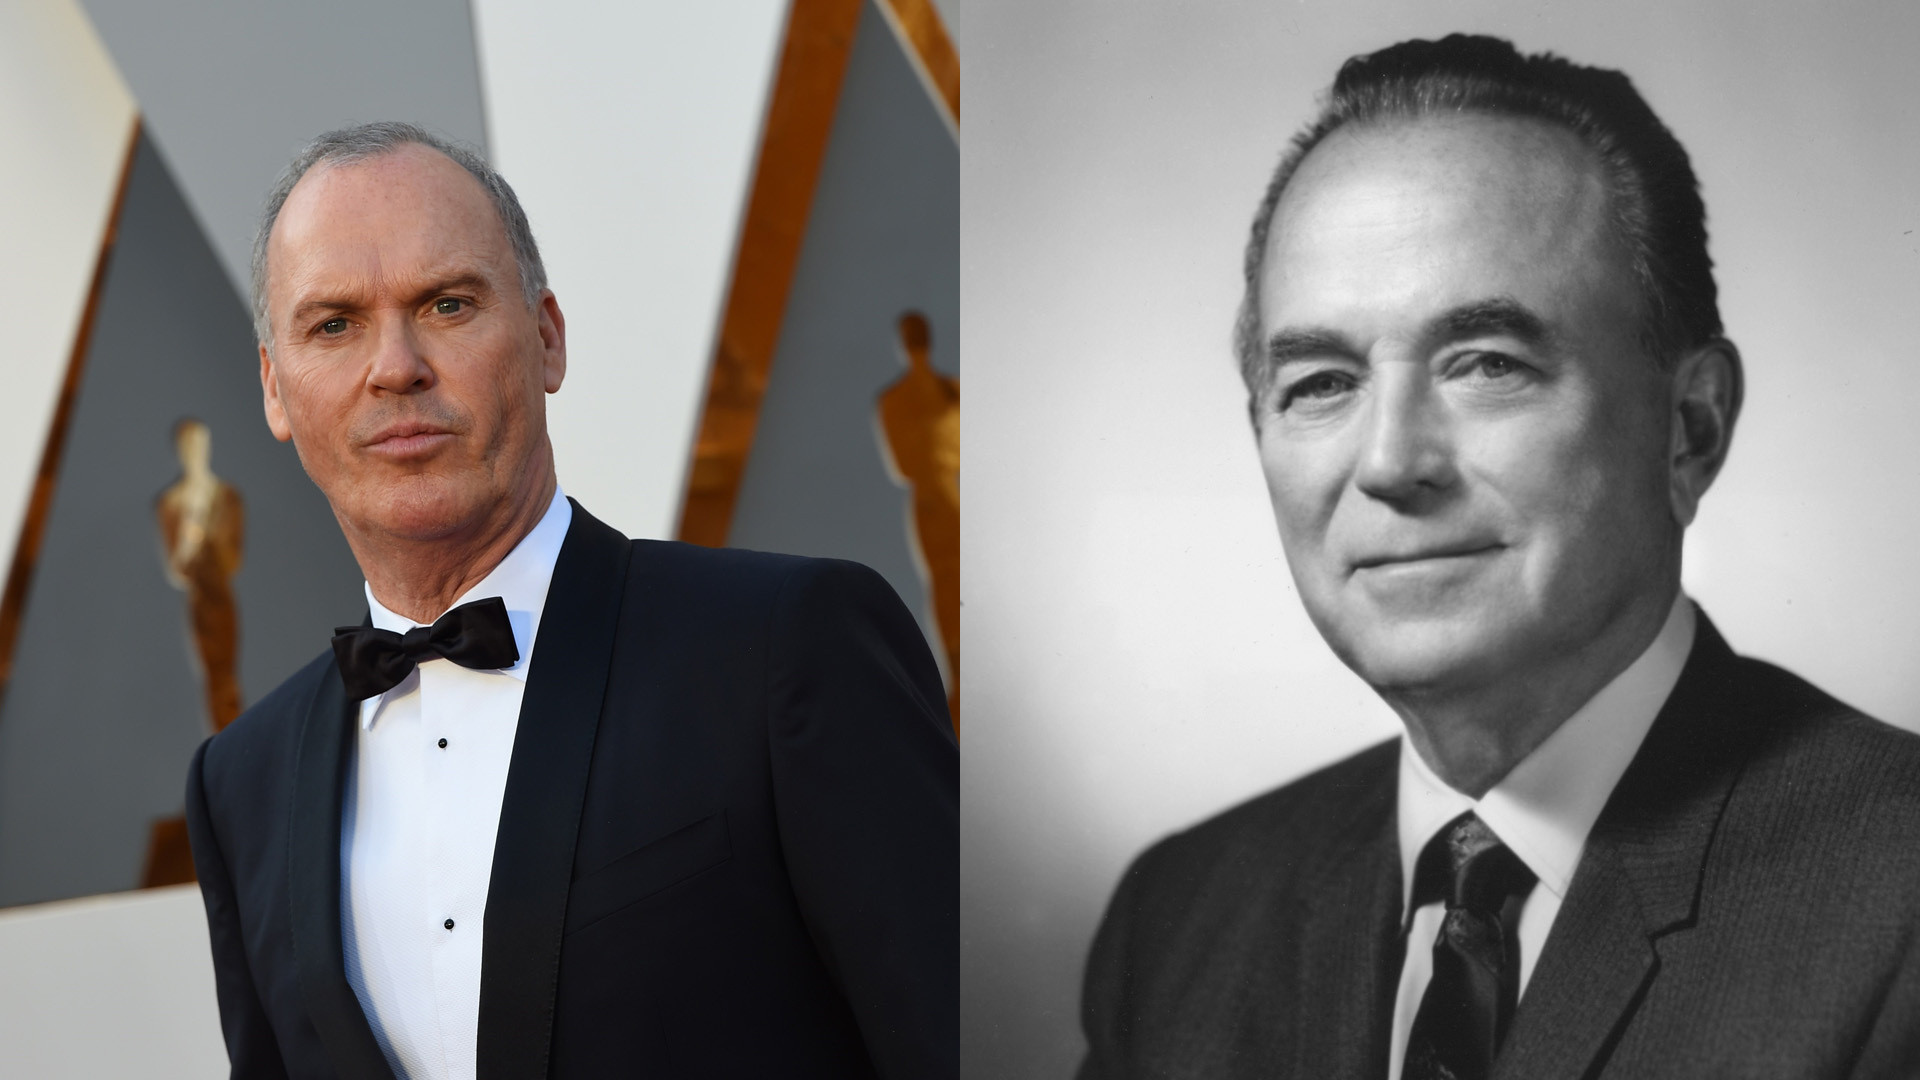 See Michael Keaton as McDonald's pioneer Ray Kroc in 'The Founder' - Chicago Tribune1920 x 1080